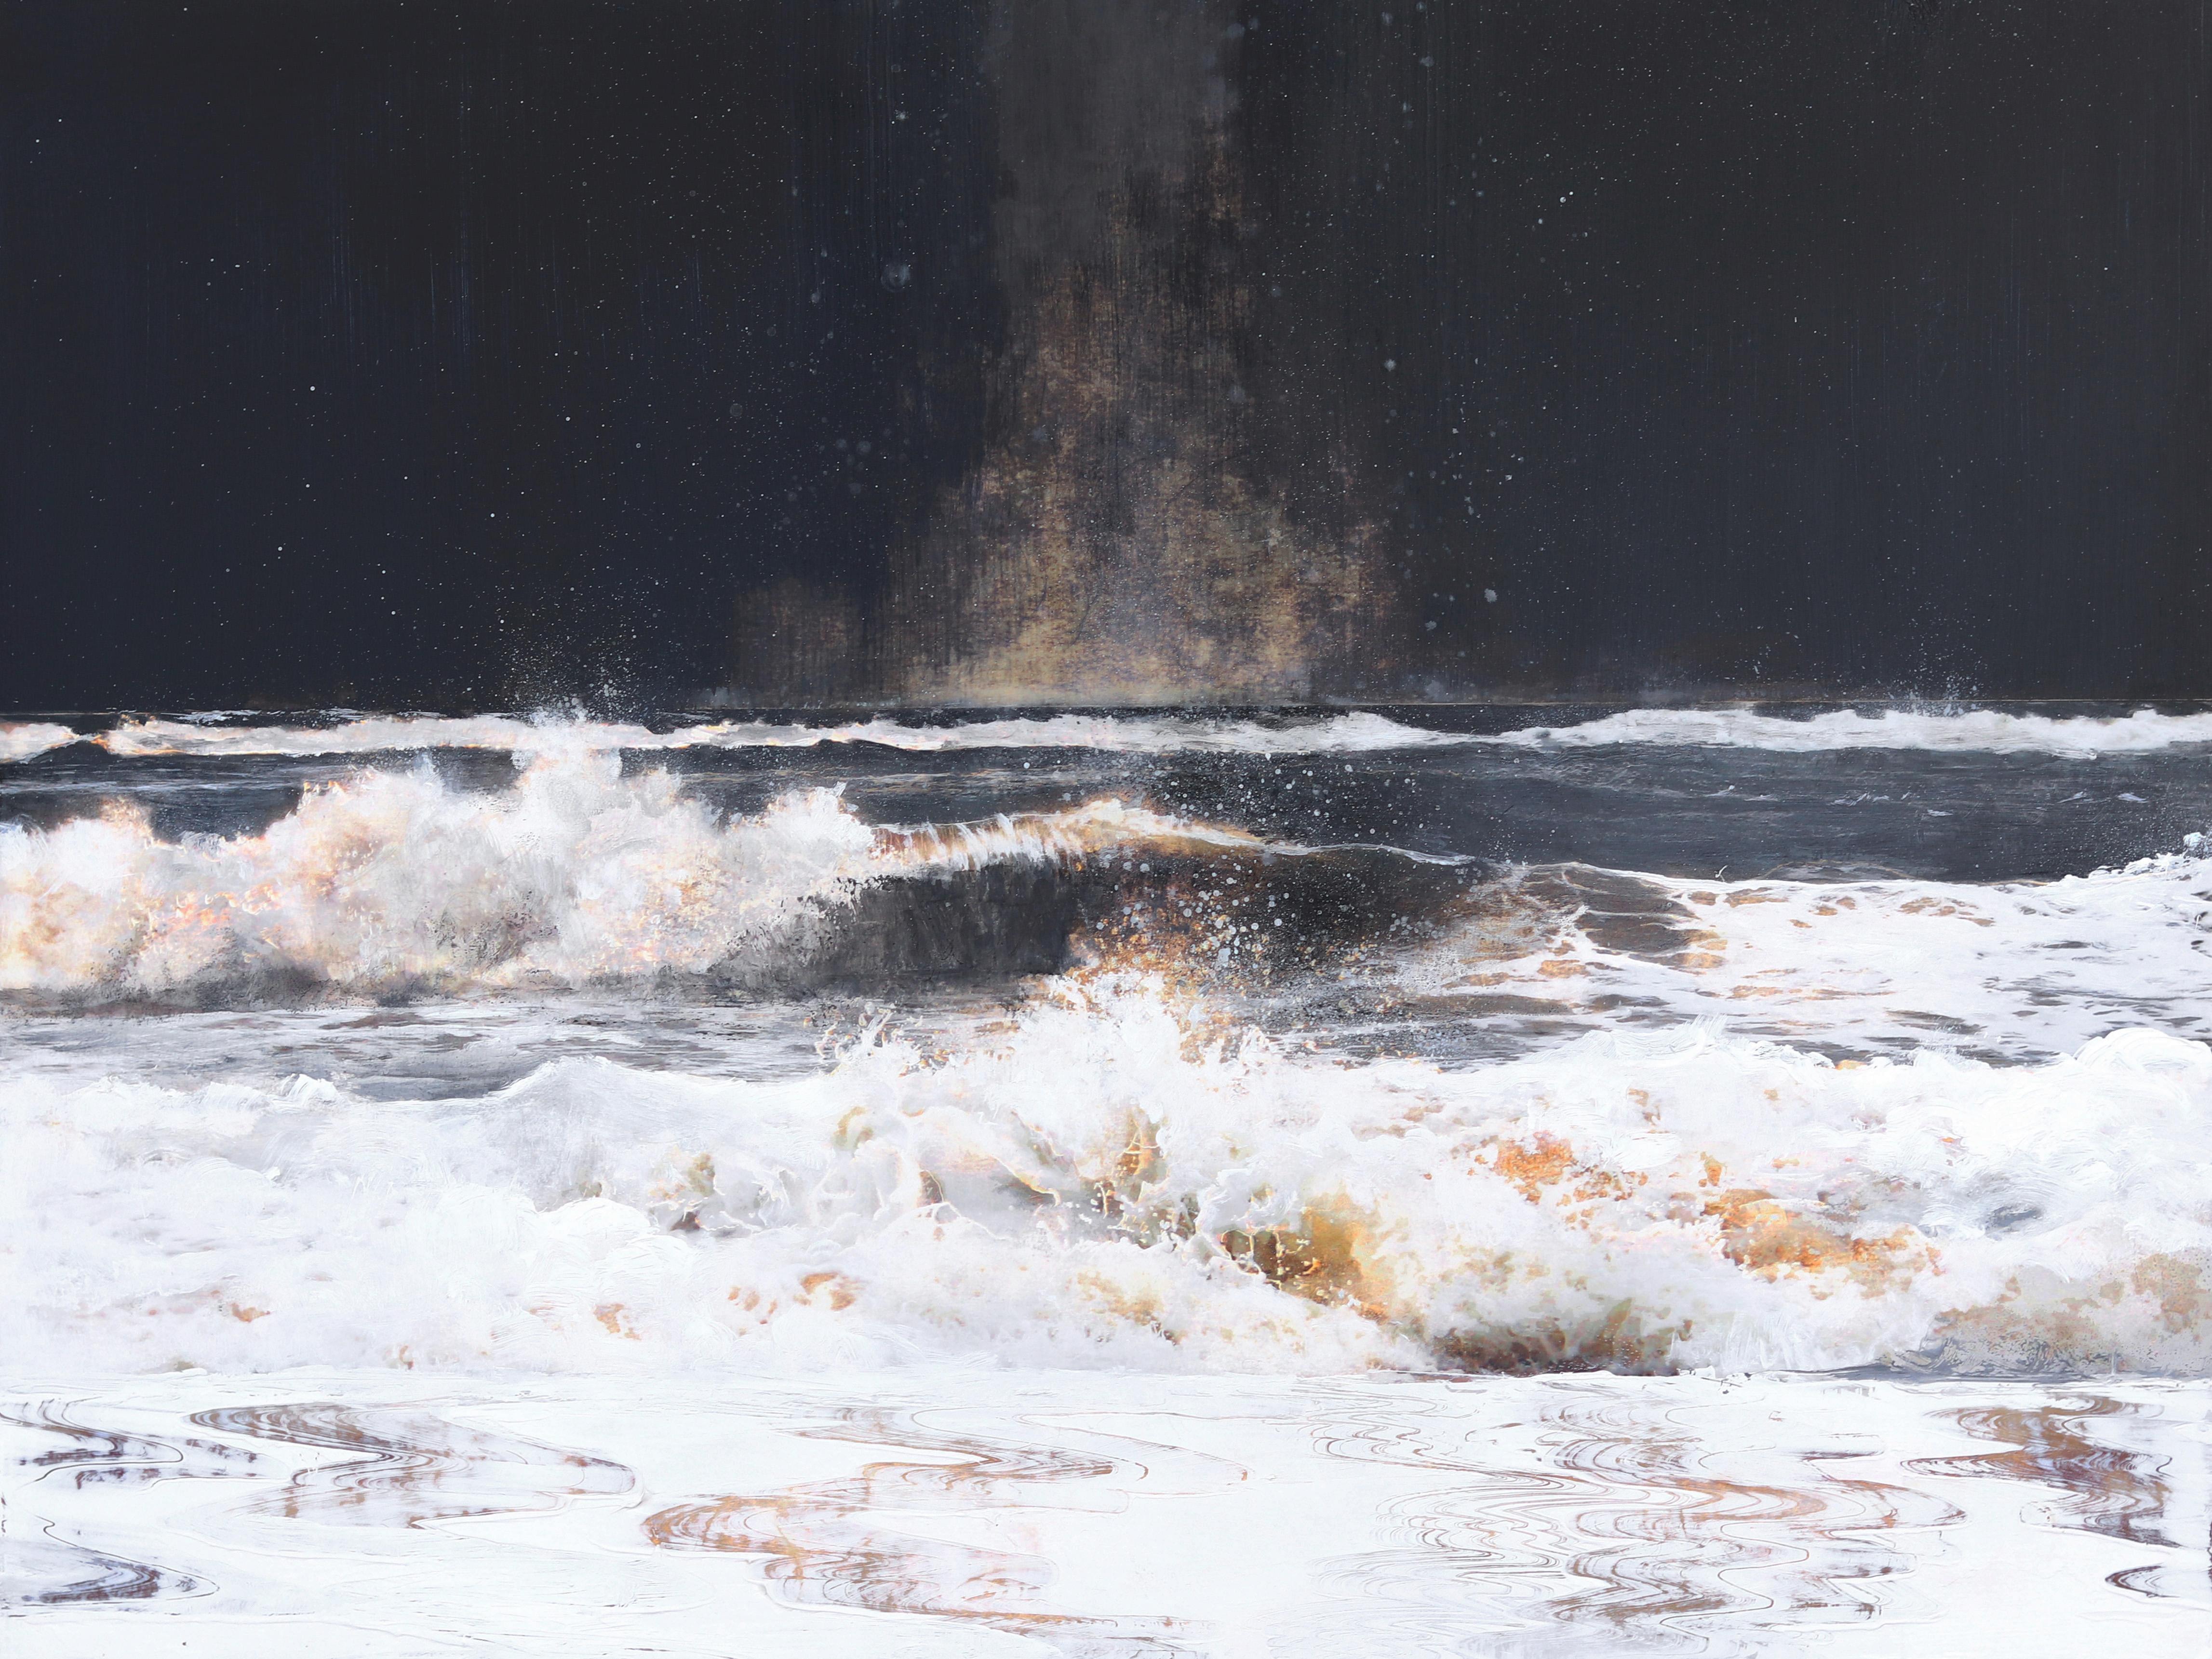 "The Depth of Night" - Seascape painting of crashing waves - Mixed Media Art by Steven Nederveen